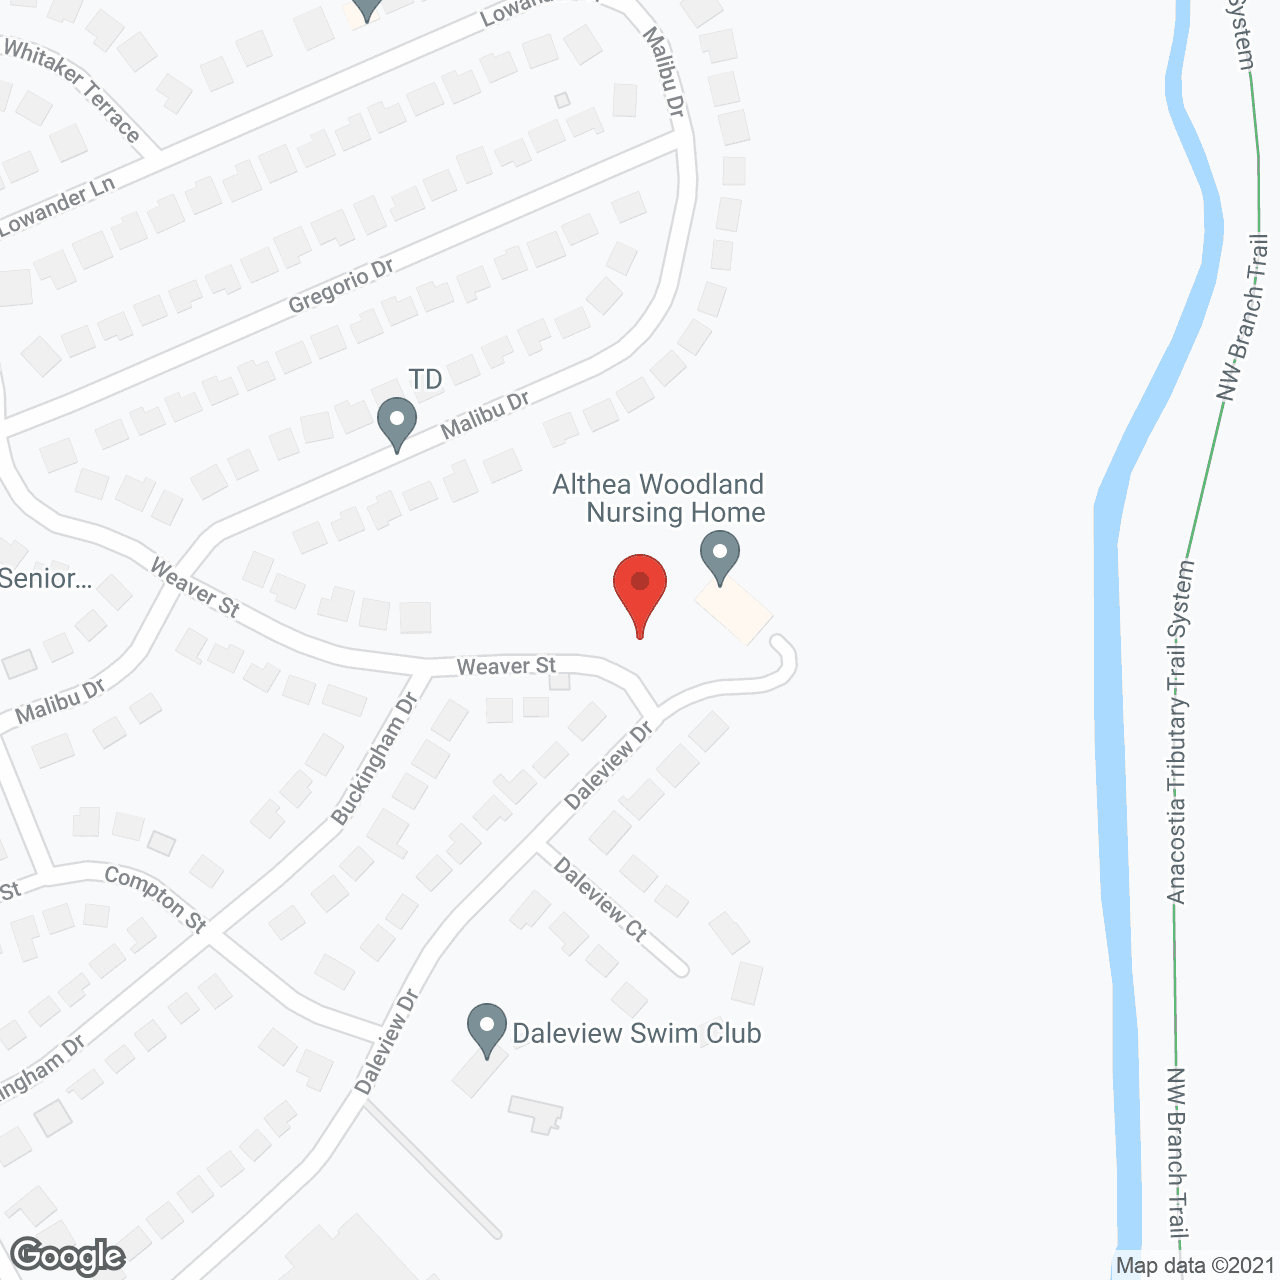 Althea Woodland Nursing Home in google map